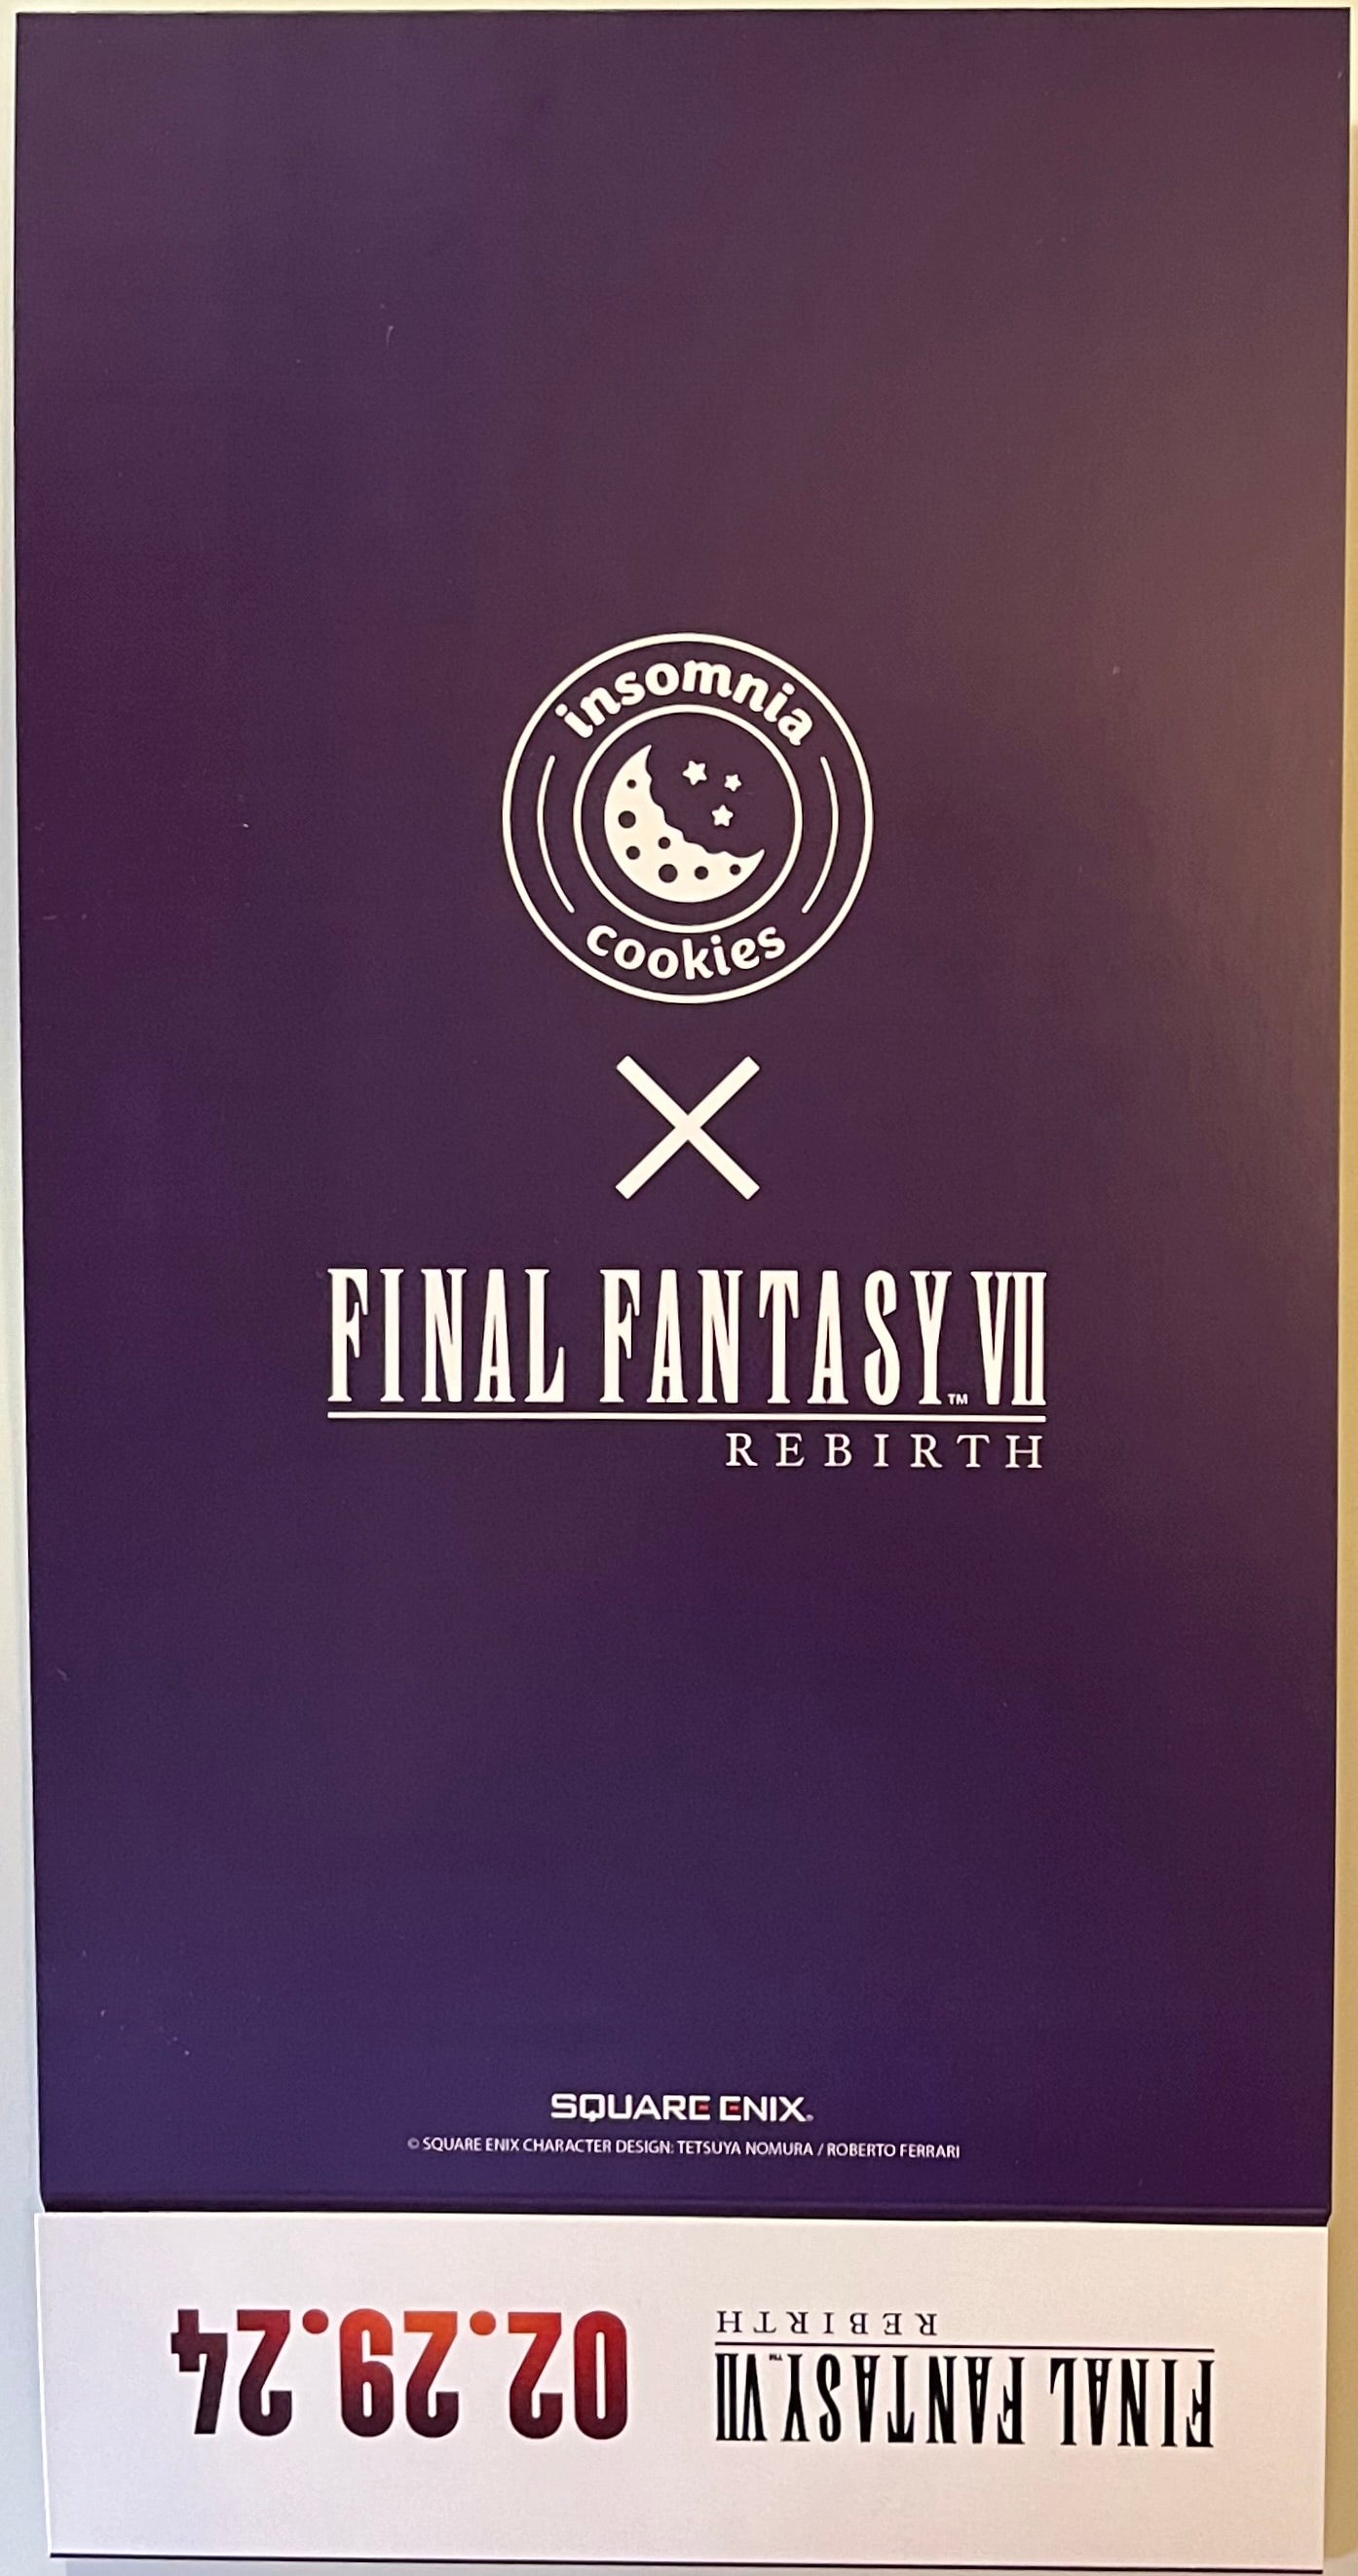 Insomnia Cookies Final Fantasy VII (7) Rebirth Cloud Strife Limited Edition Cookie Box Sleeve